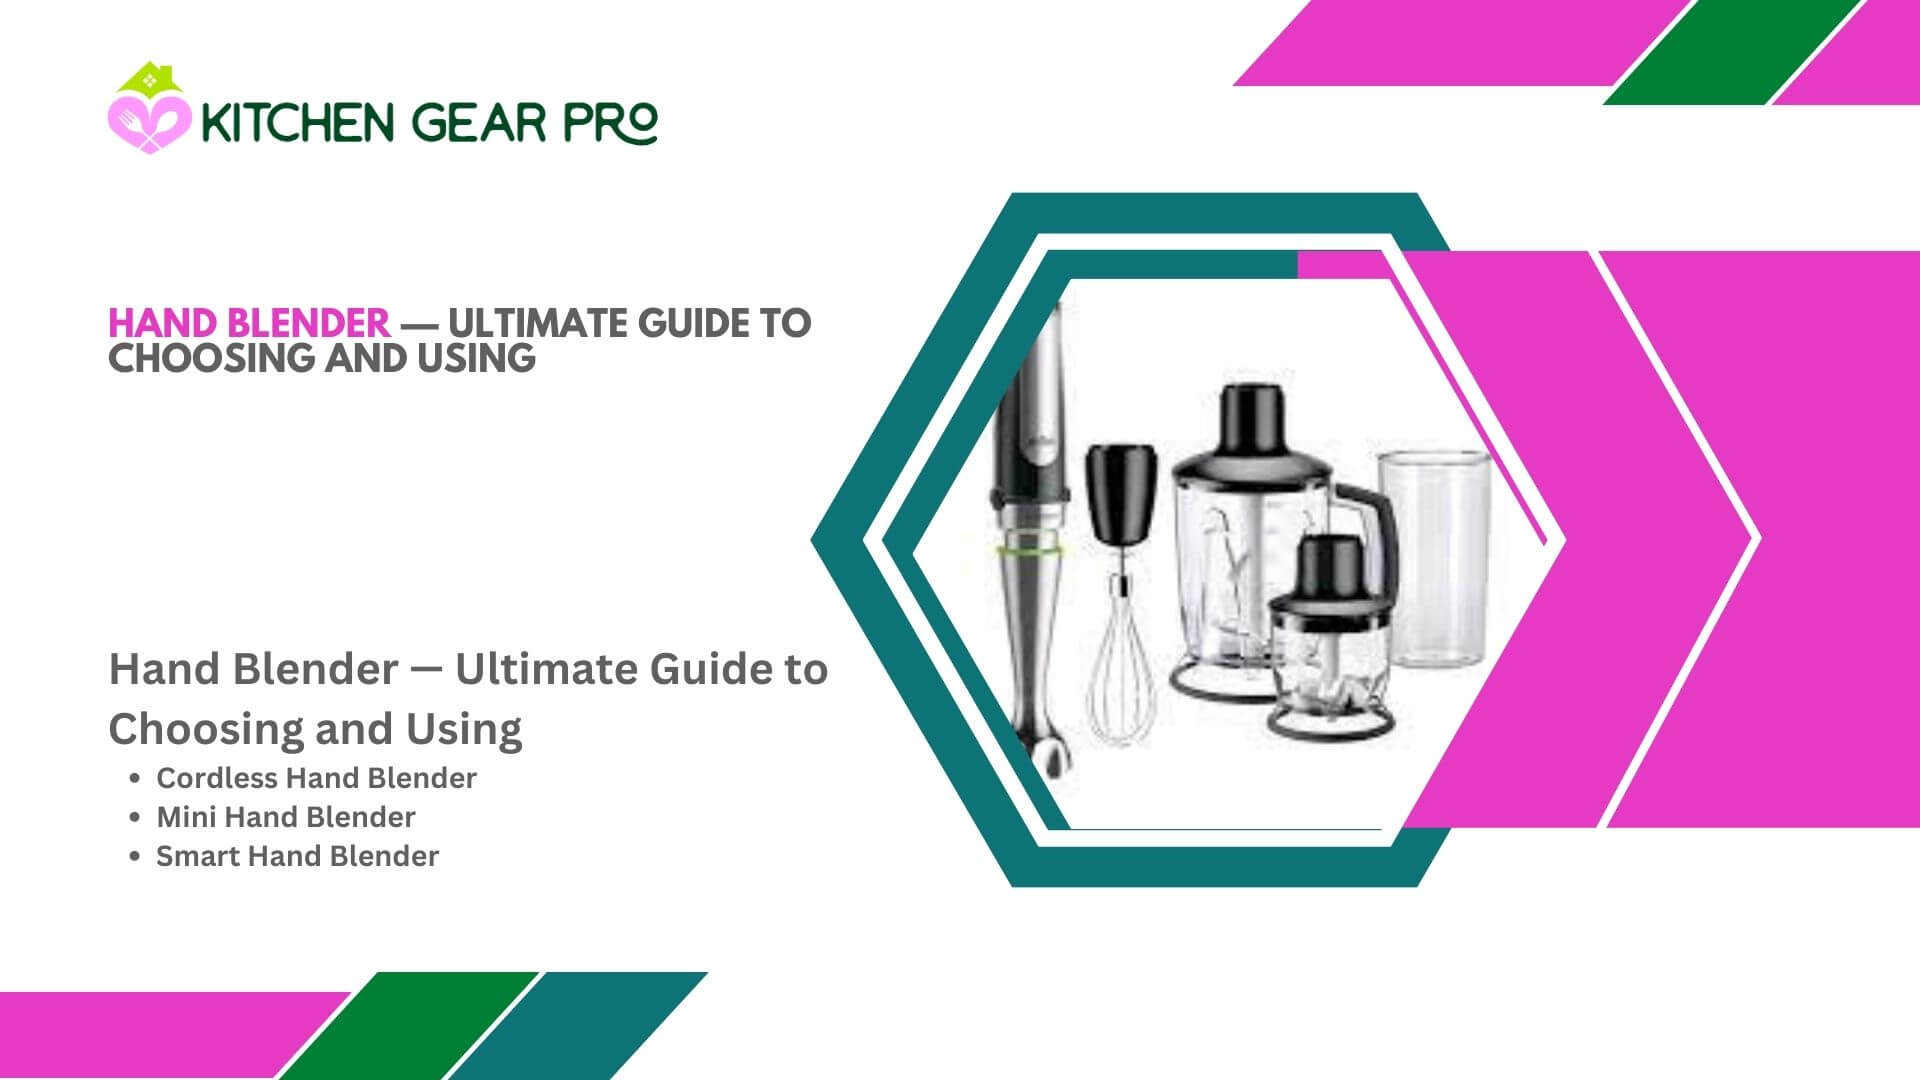 Hand Blender — Ultimate Guide to Choosing and Using